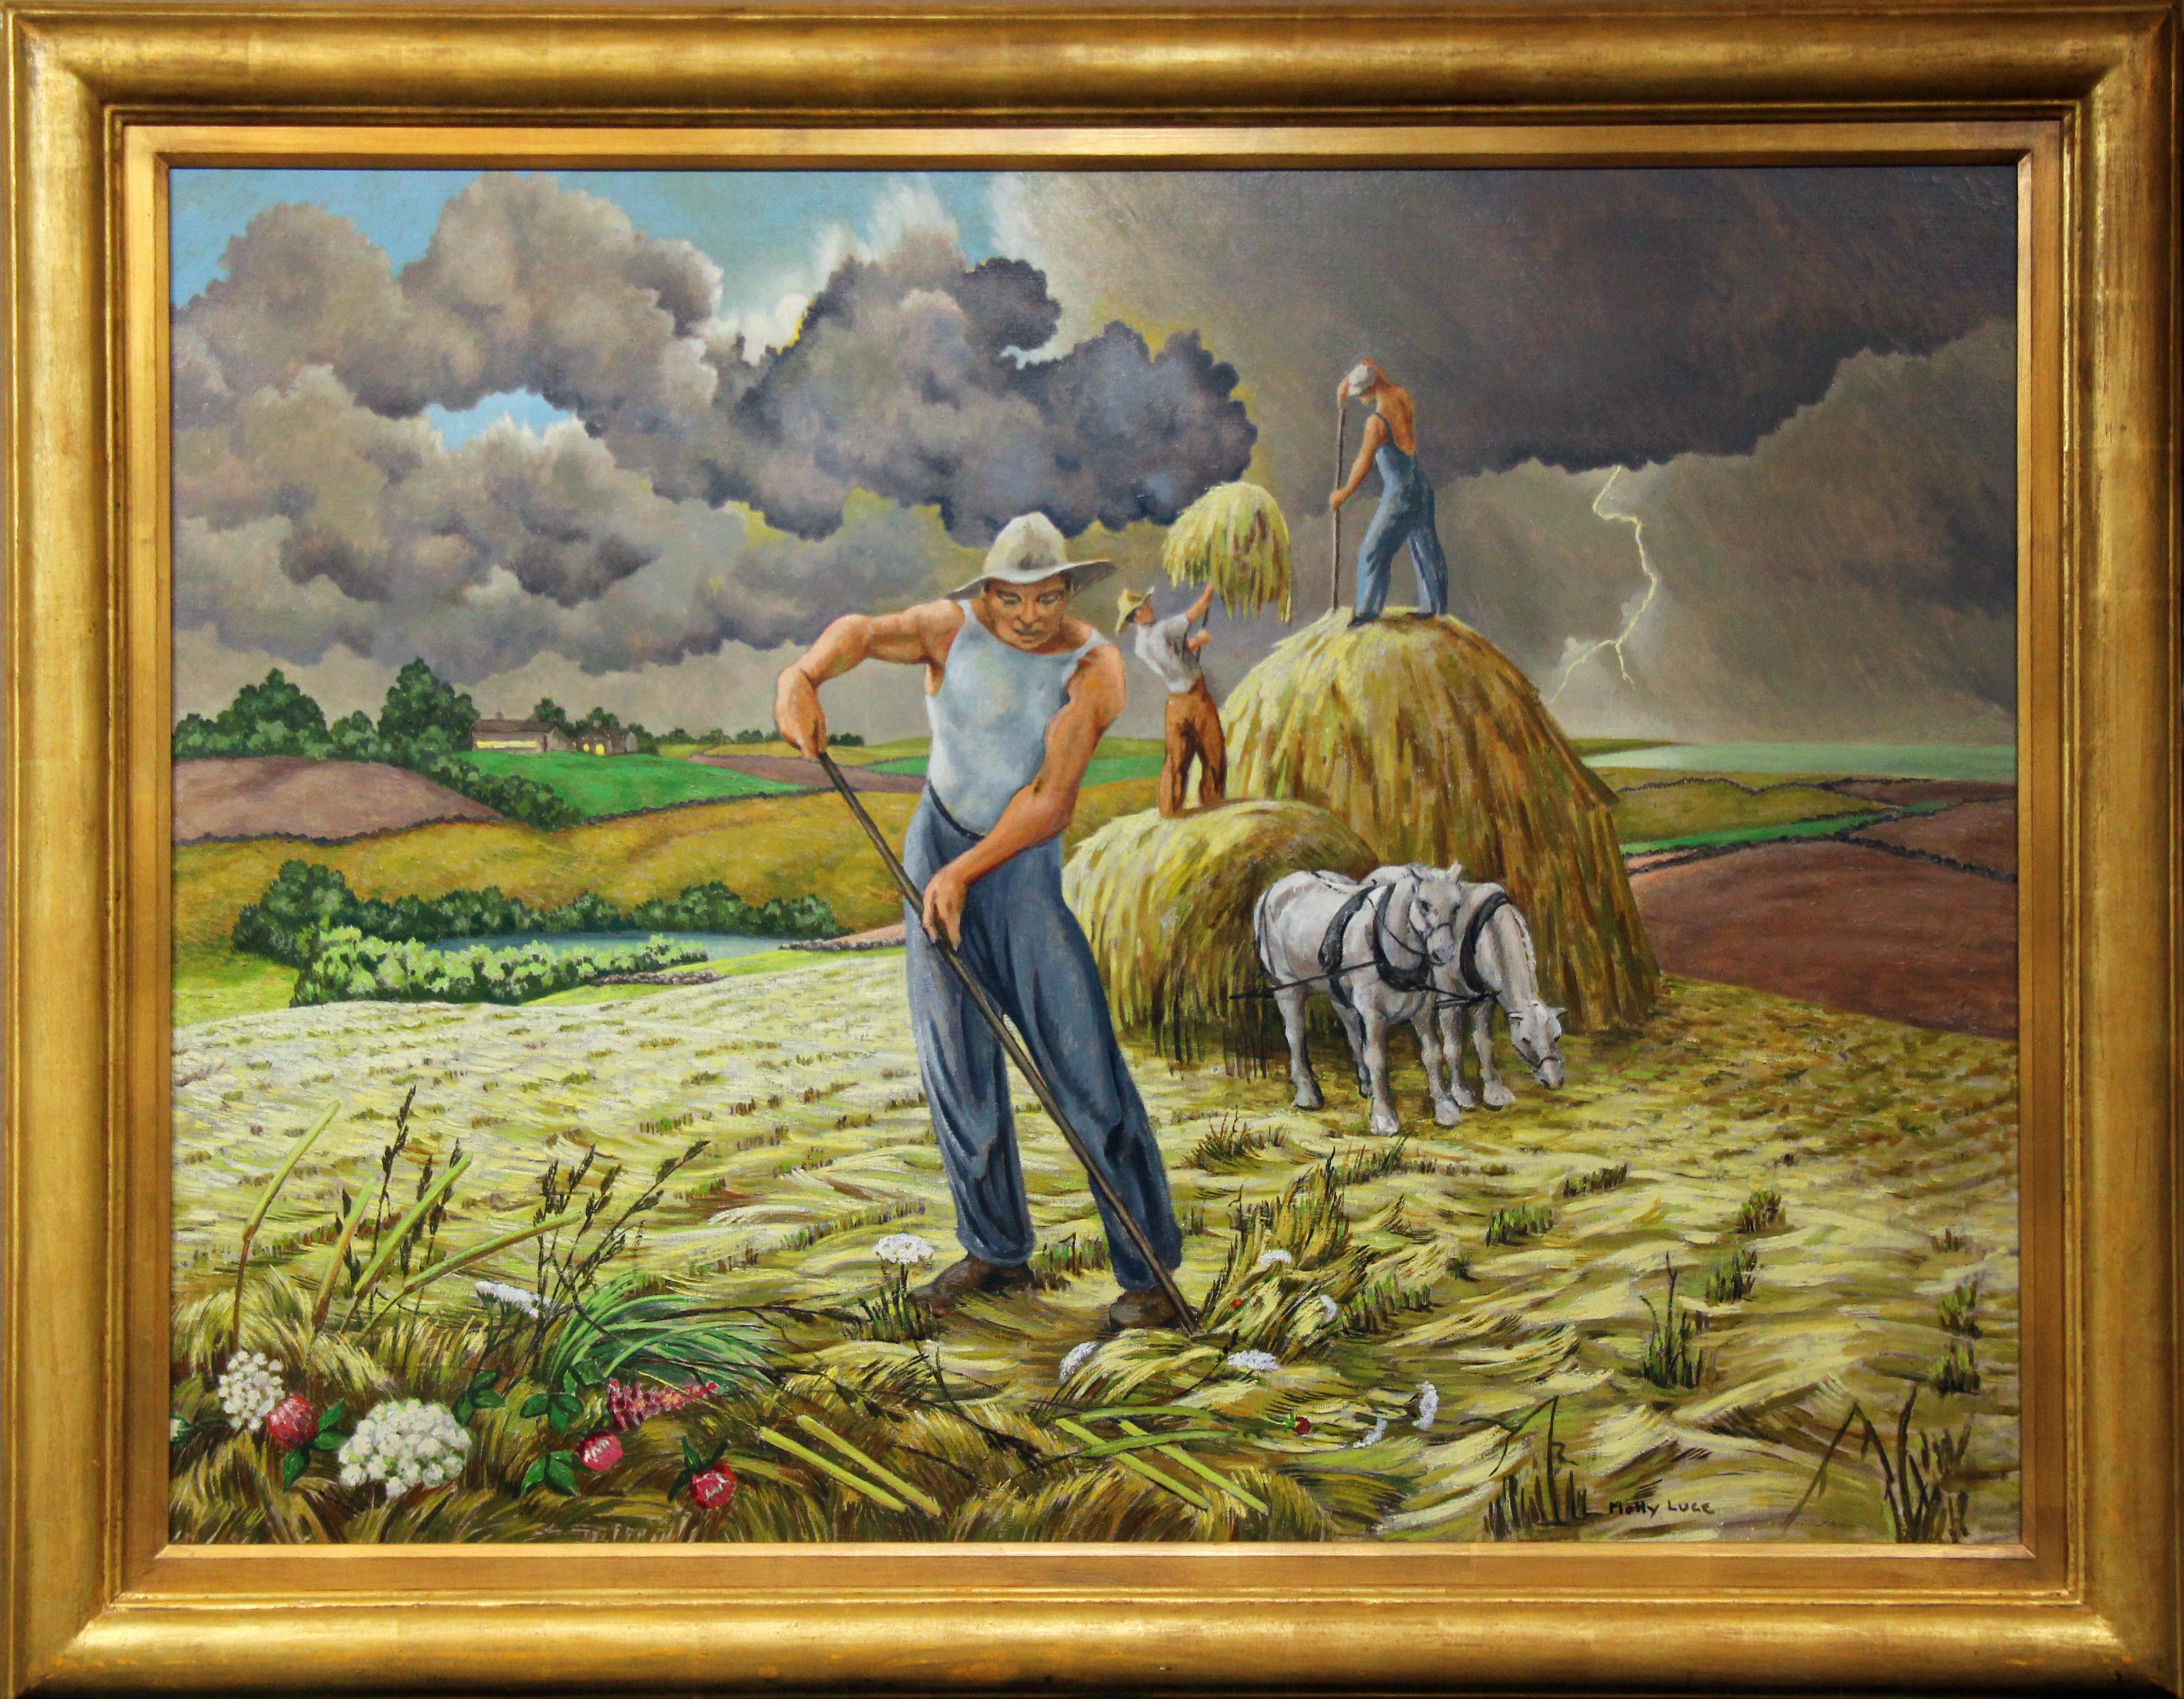 Harvest, Landscape and Figures by Female American Realist Artist - Painting by Molly Luce